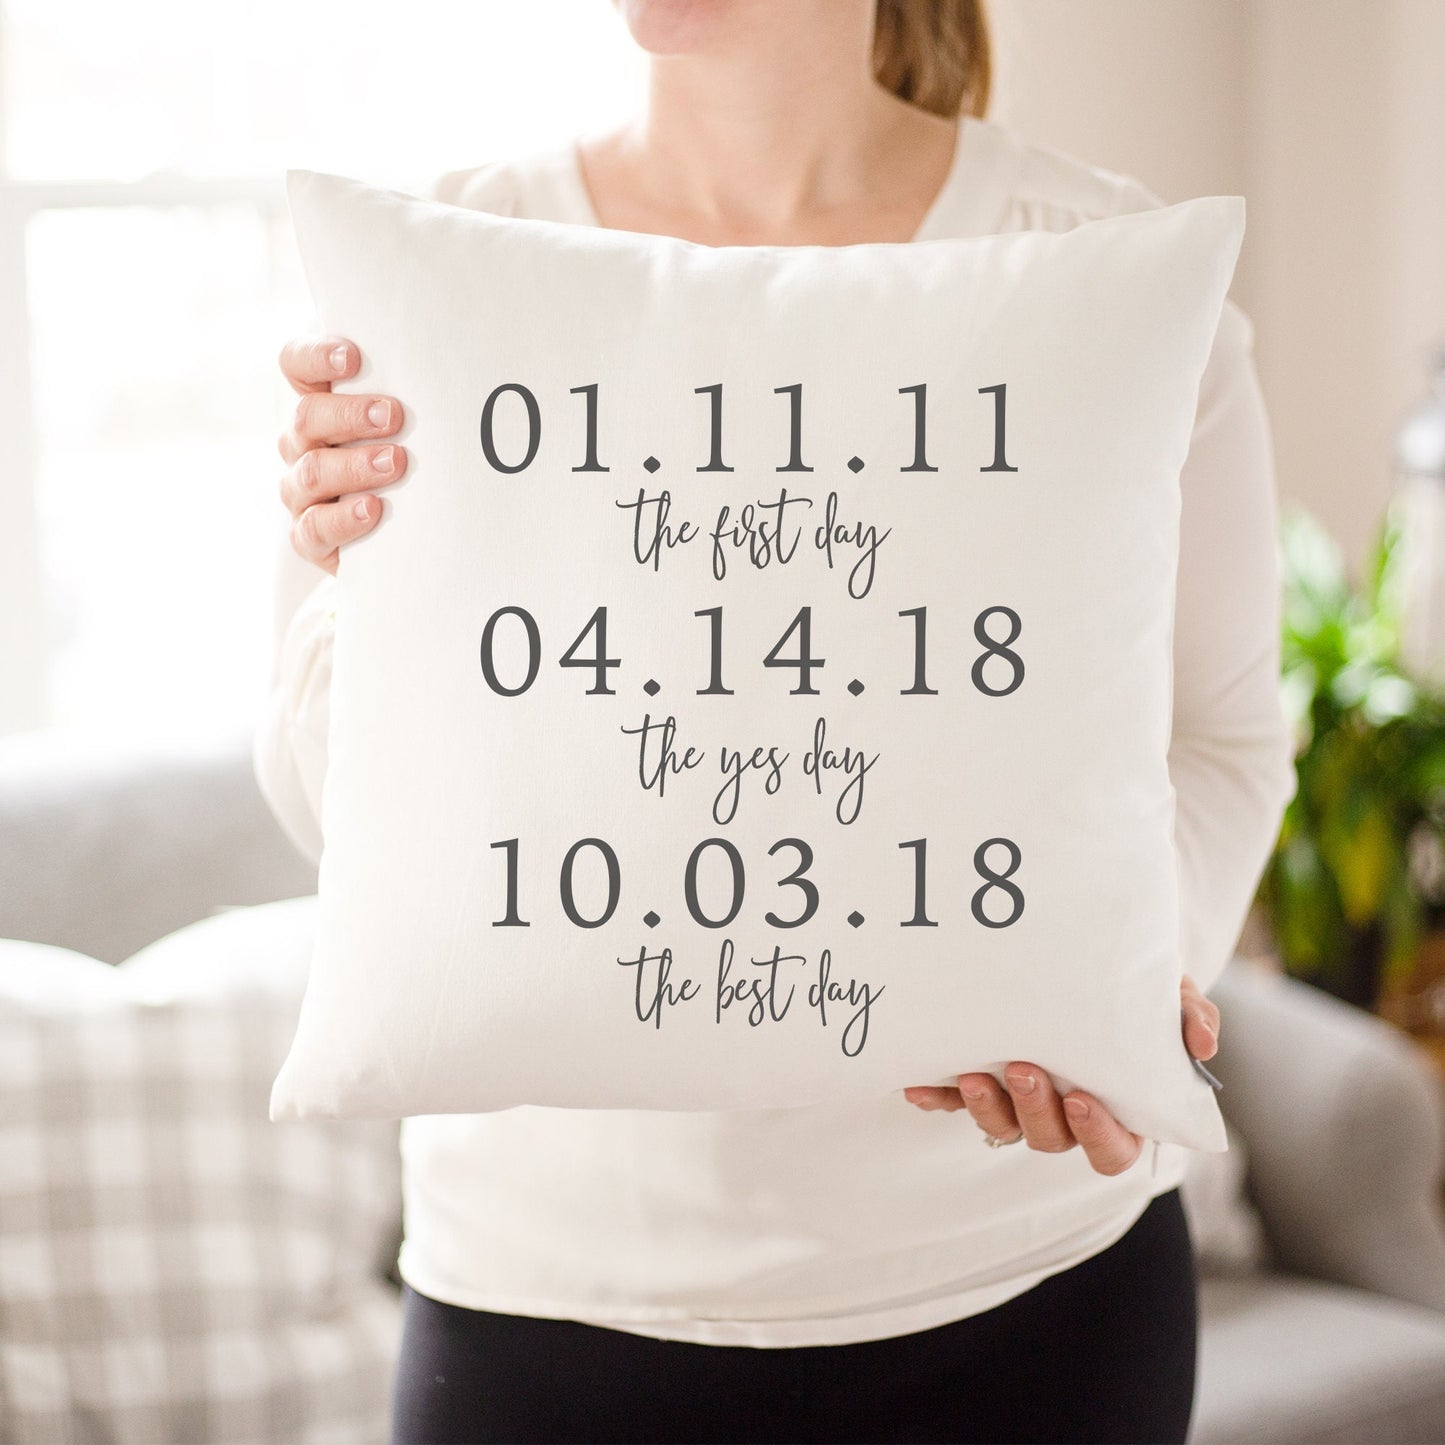 Load image into Gallery viewer, Personalized Wedding Gift for Groom | Gift for Couple Newlywed Gift | Custom Date Gift for Bride and Groom | Rustic Home Decor Throw Pillow
